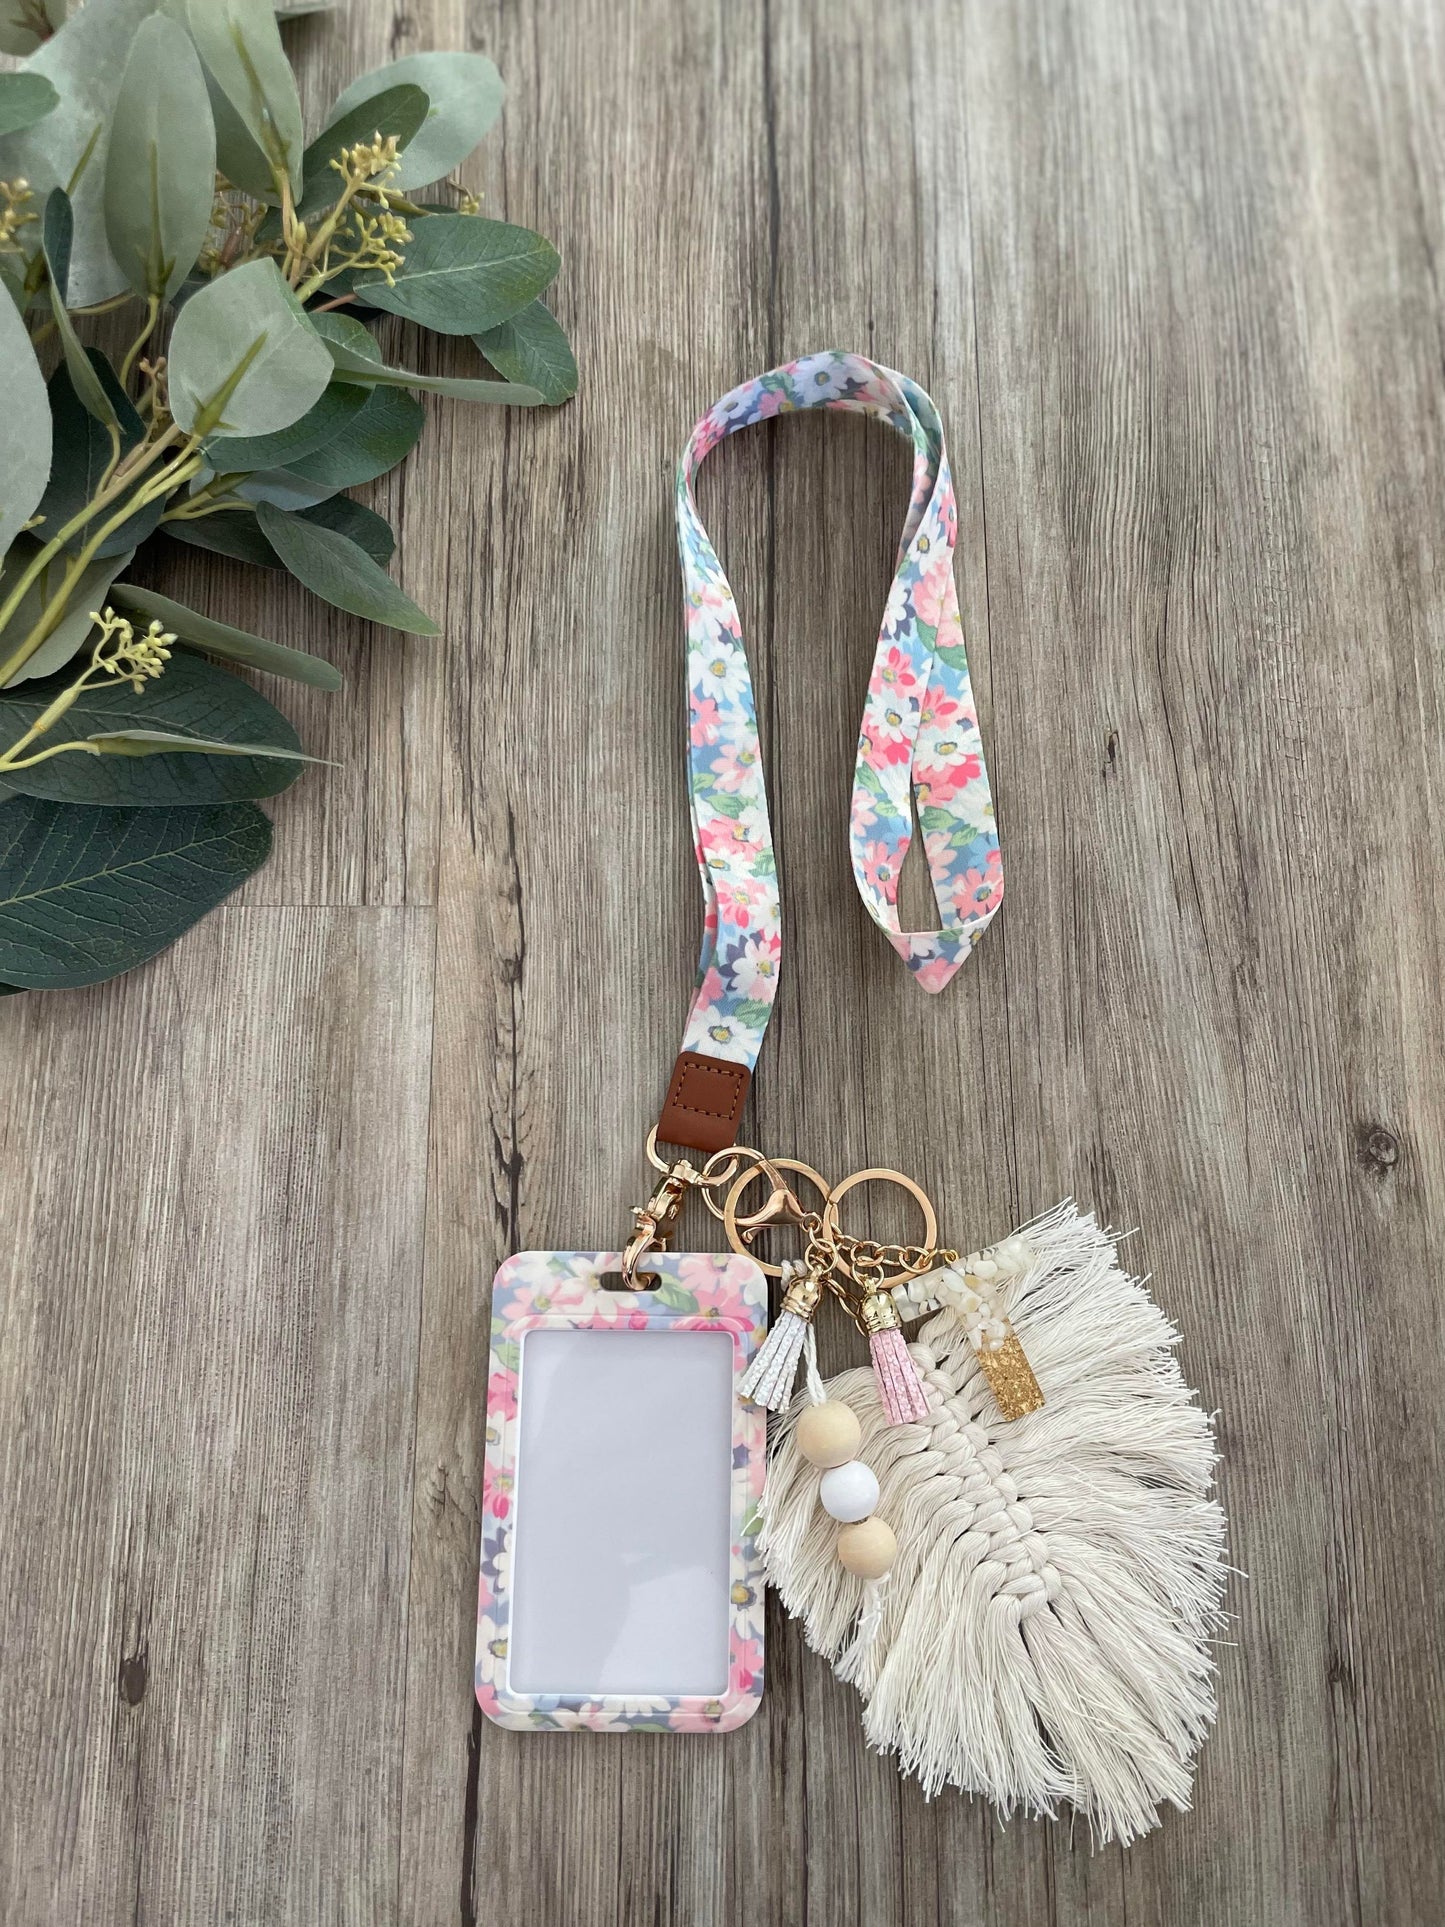 Floral Delight Lanyard/Keychain + ID Holder